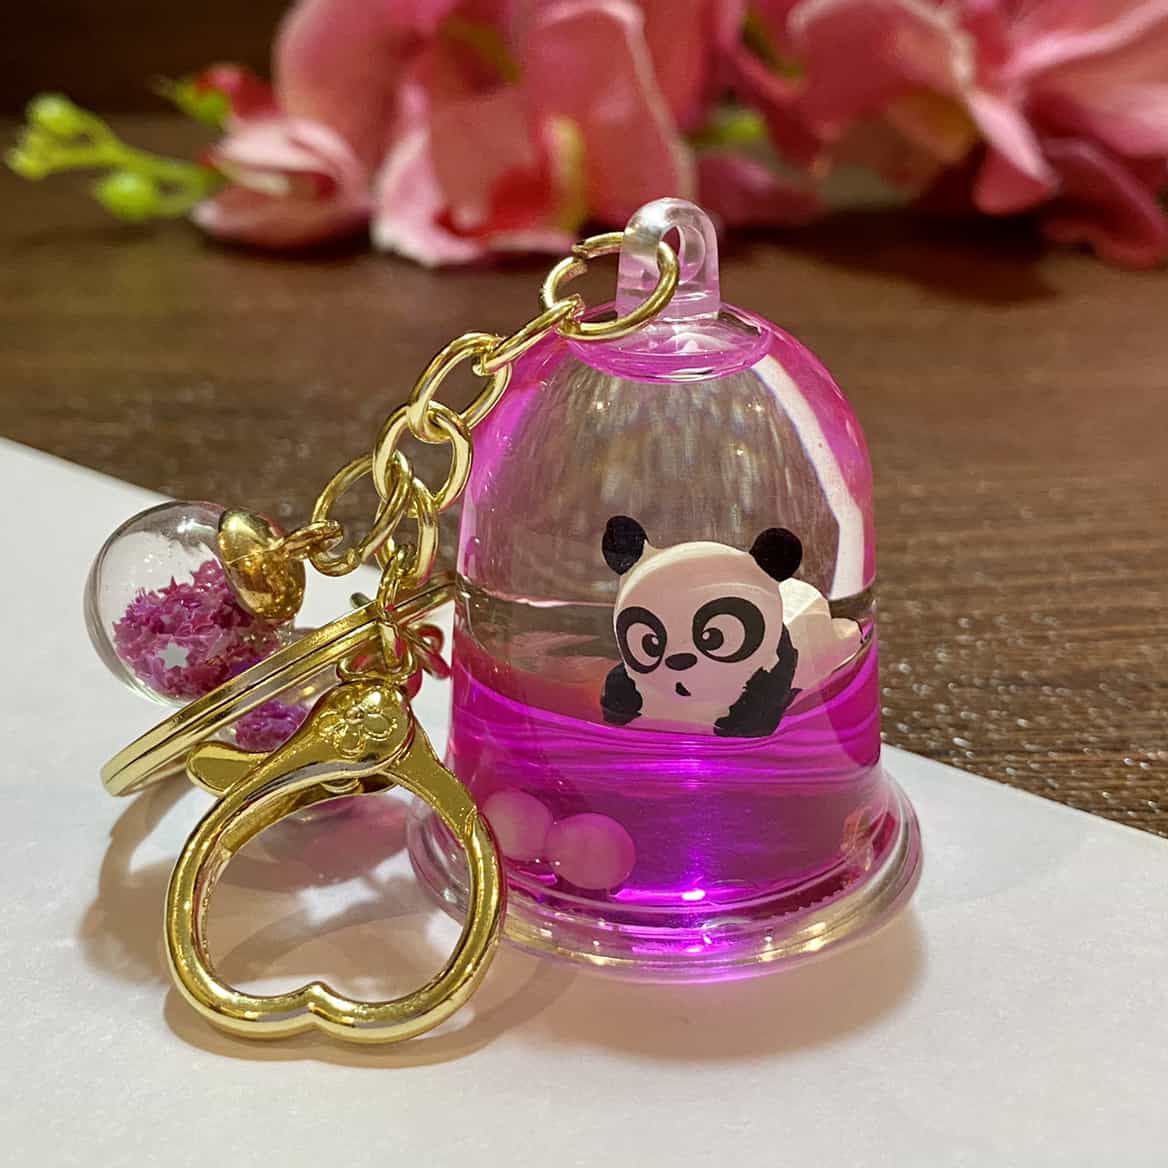 Panda Keychains at Rs 199.00, Keychains